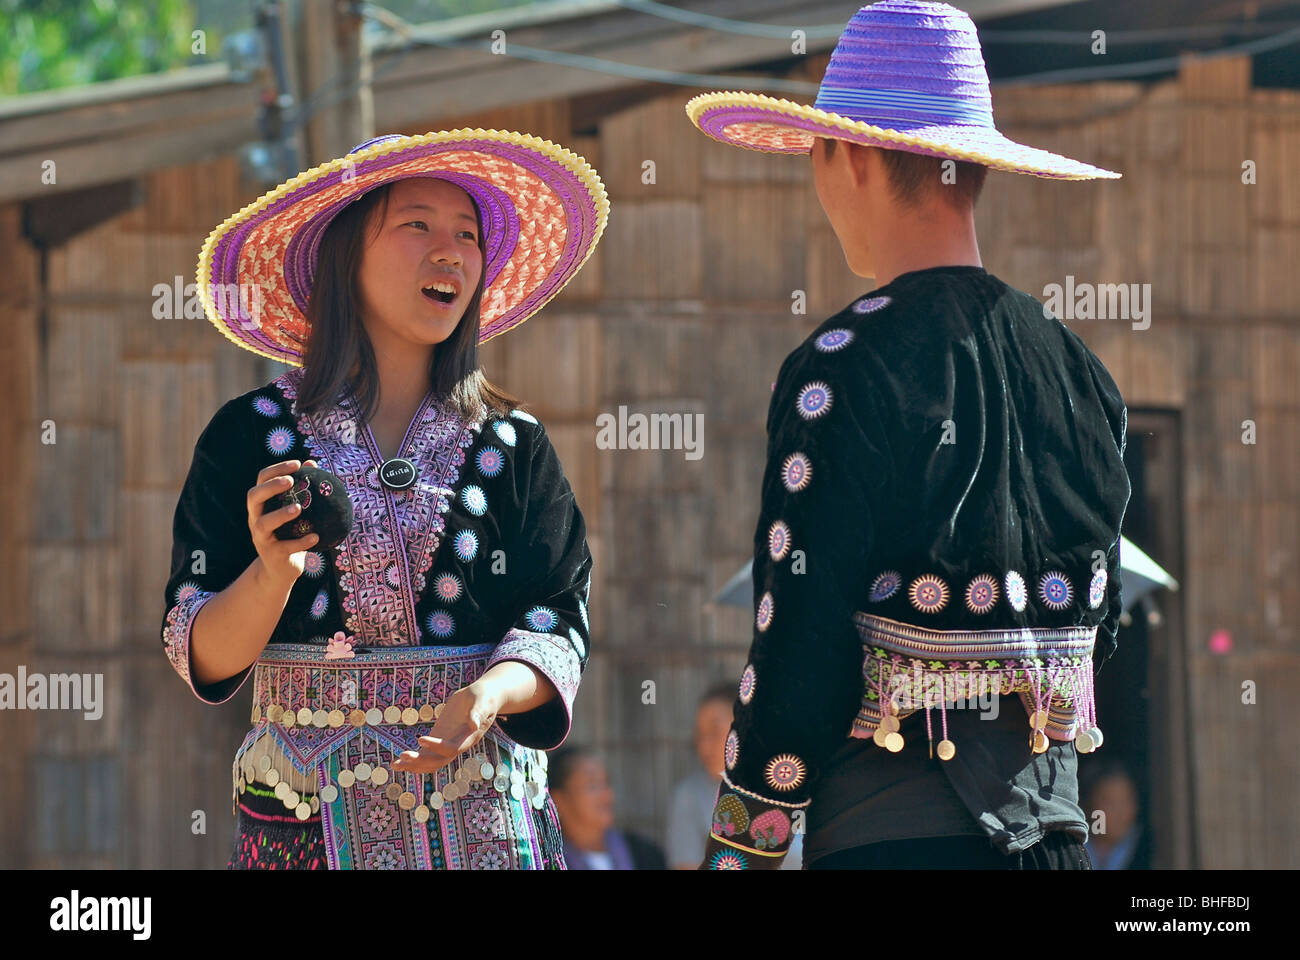 Hmong woman and man with ball dressed in traditional costume, Mae Rim Valley, Hmong village,  Province Chiang Mai, Thailand, Asi Stock Photo